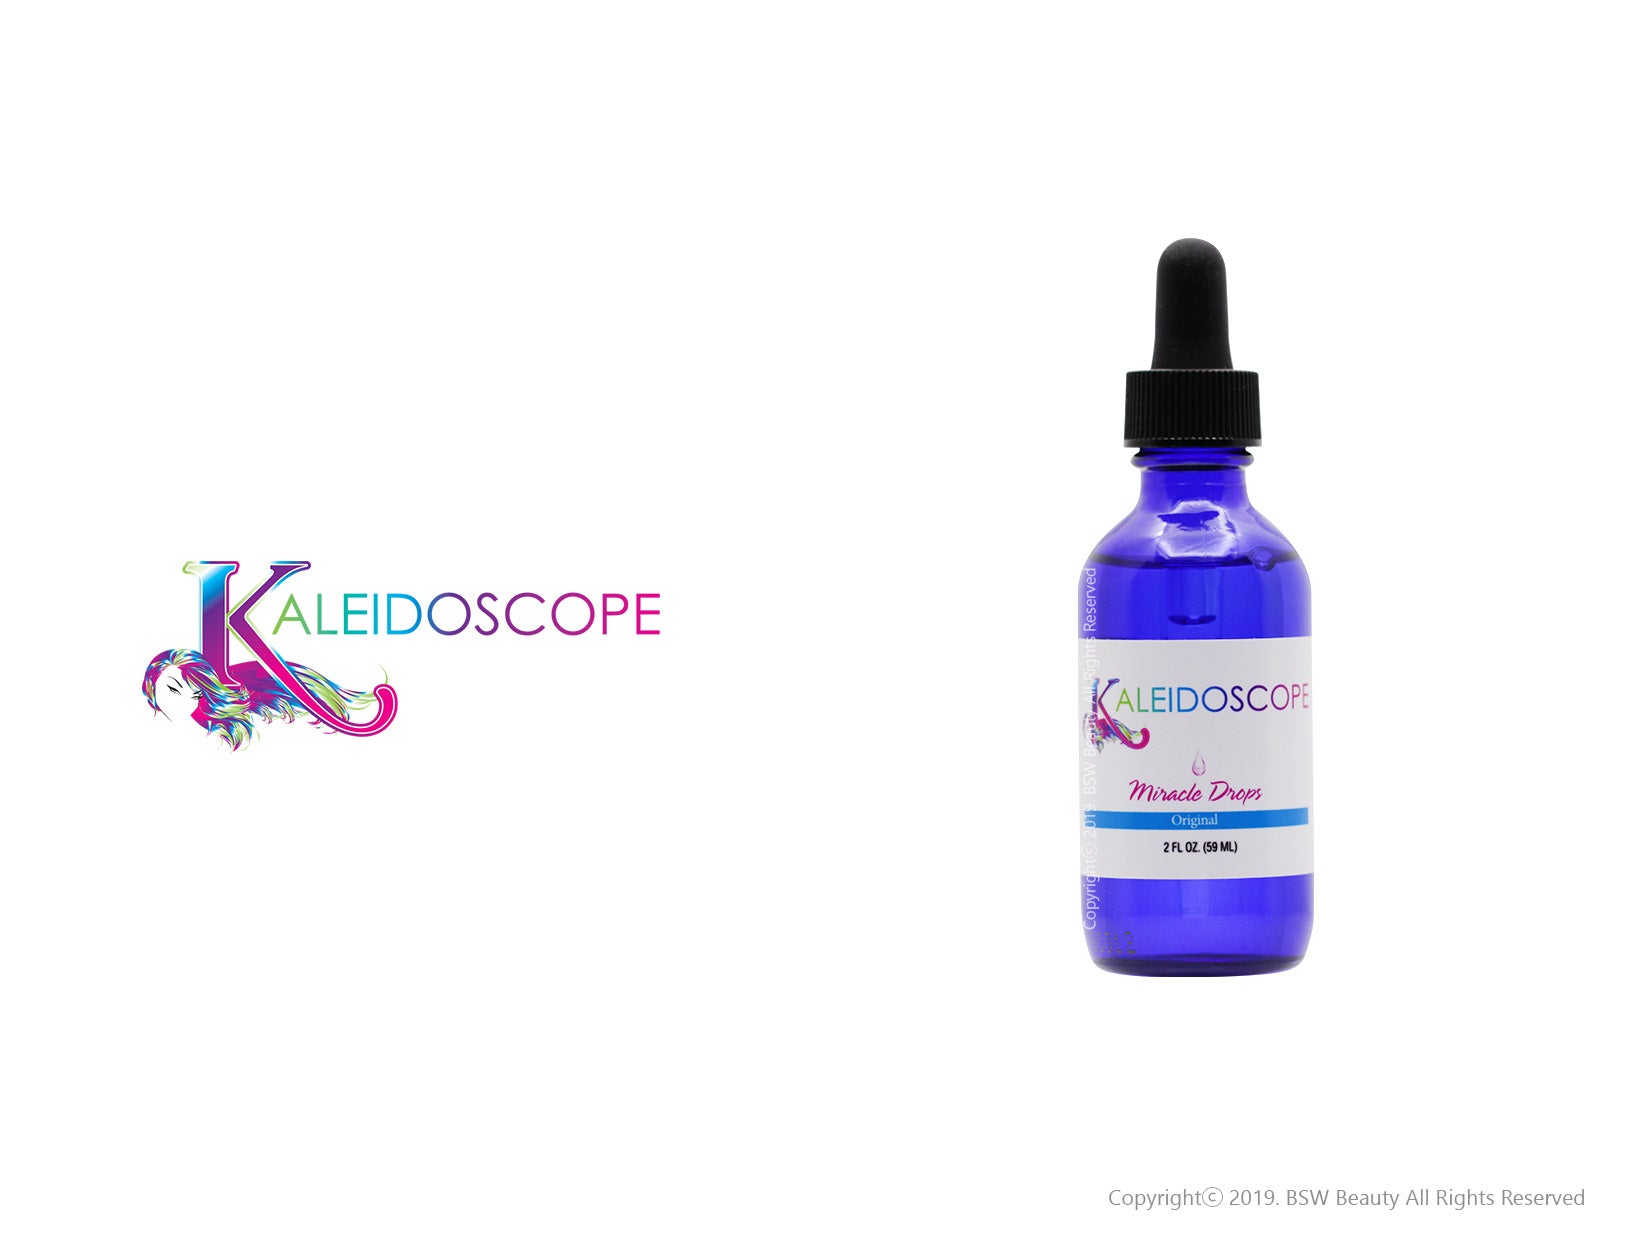 does kaleidoscope miracle drops work eyebrows